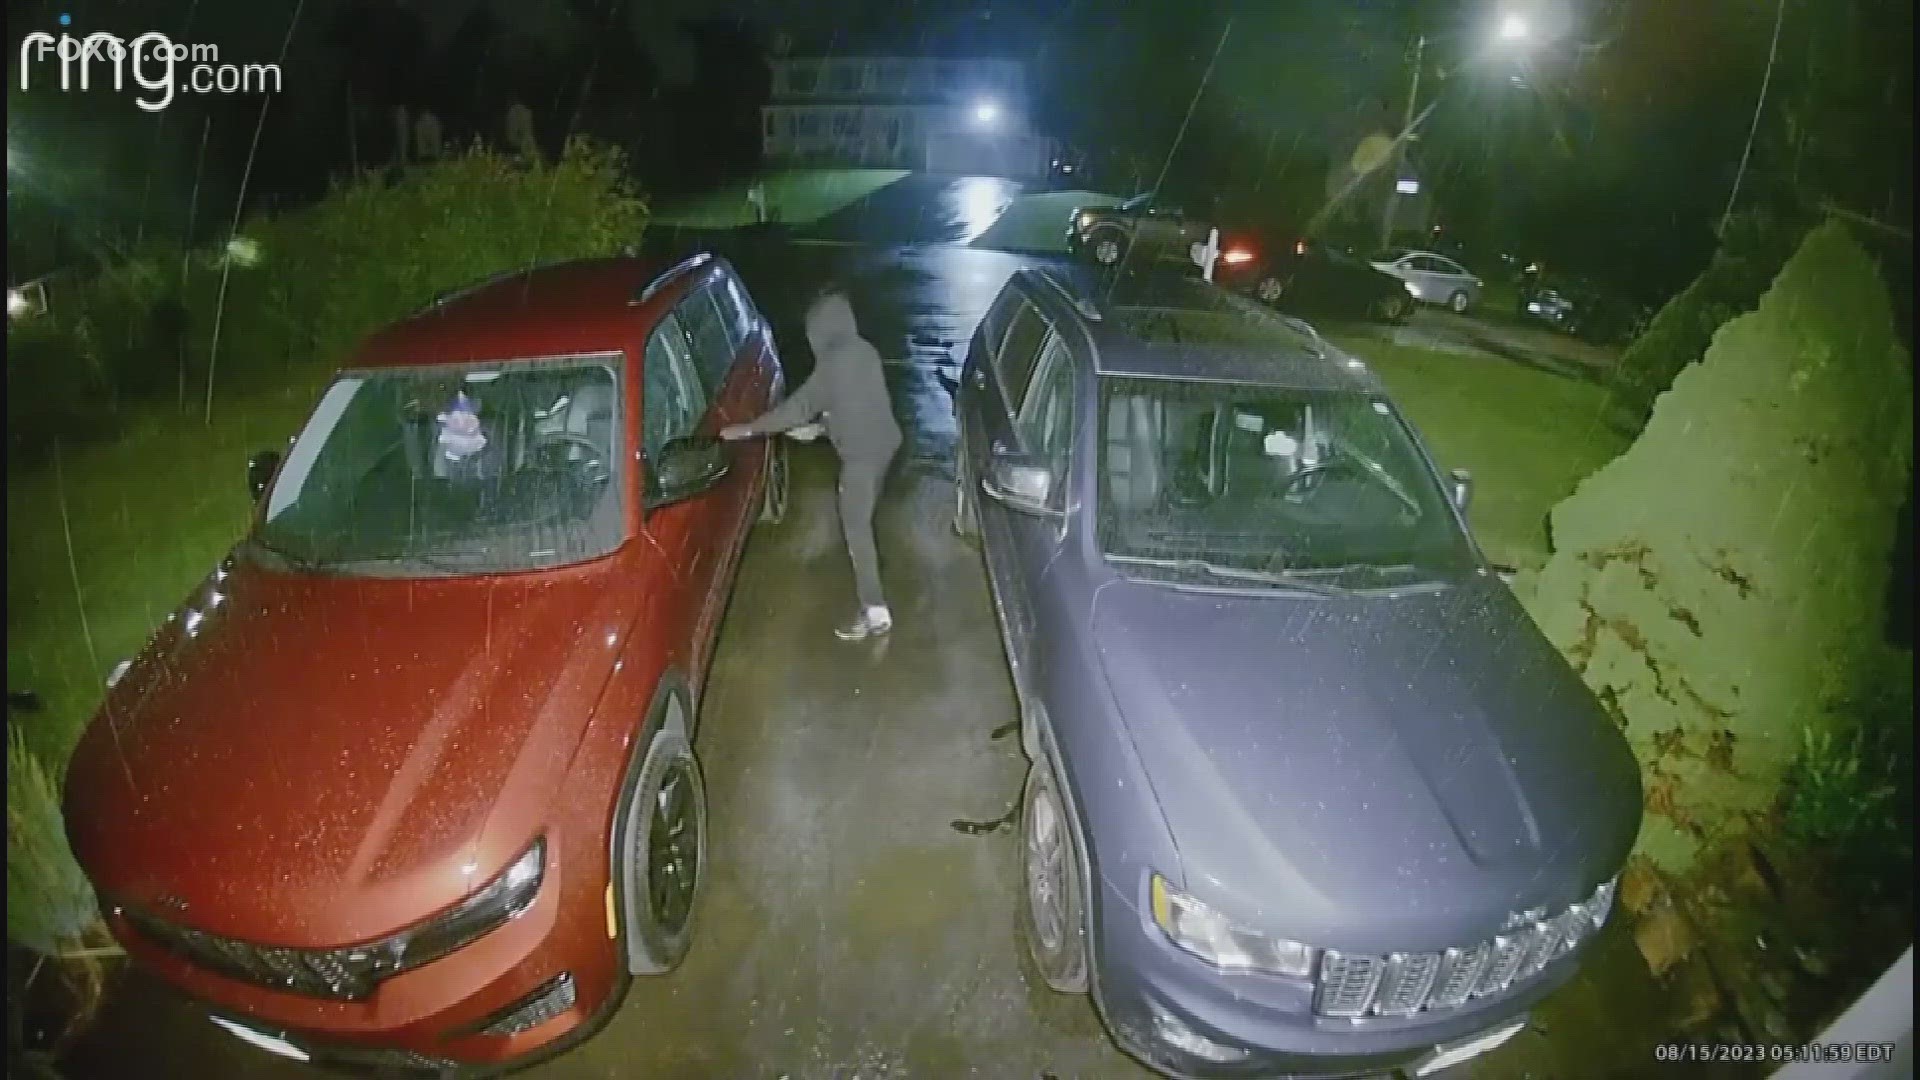 East Haven police are asking residents to lock their car doors at night.